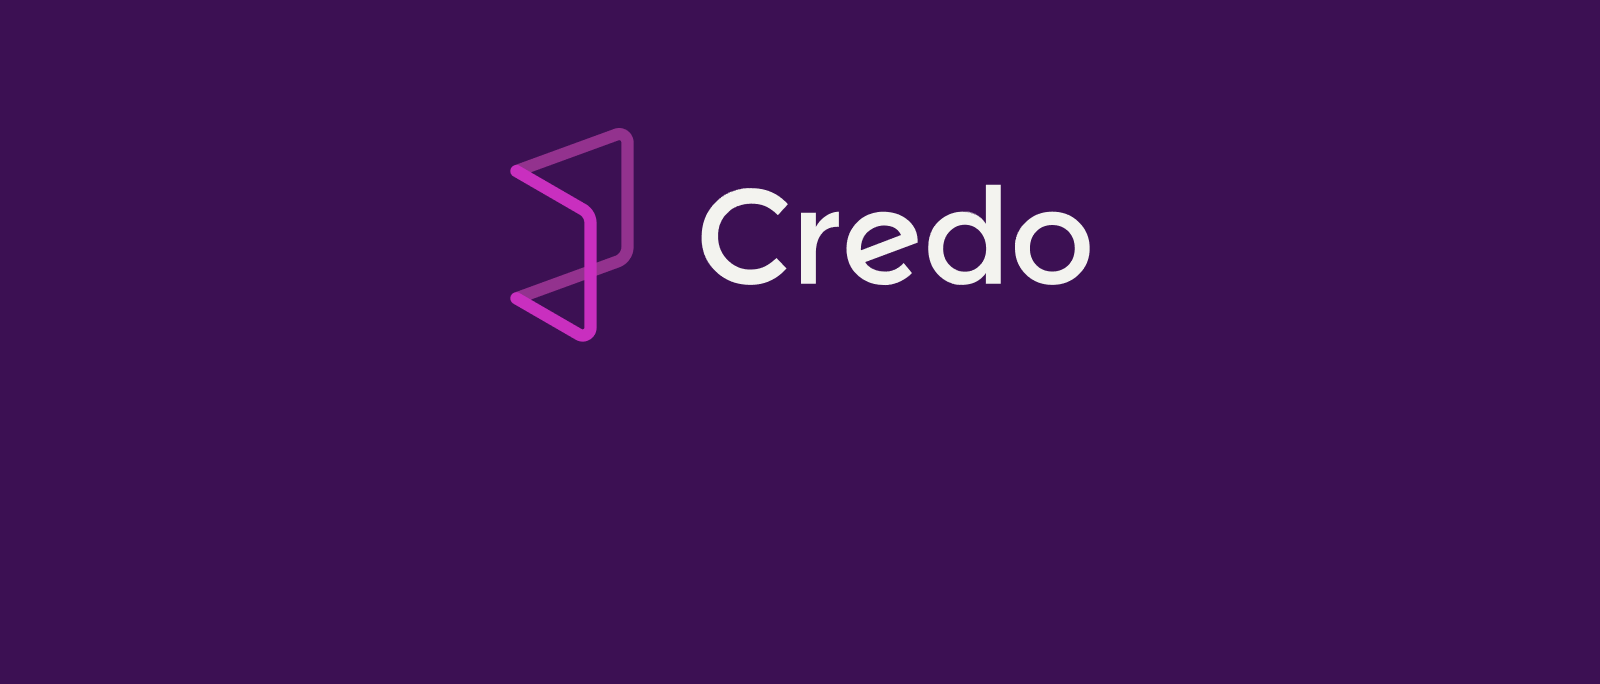 Credo Health Secures $5.25M to Revolutionize Value-Based Care with AI-Powered Platform